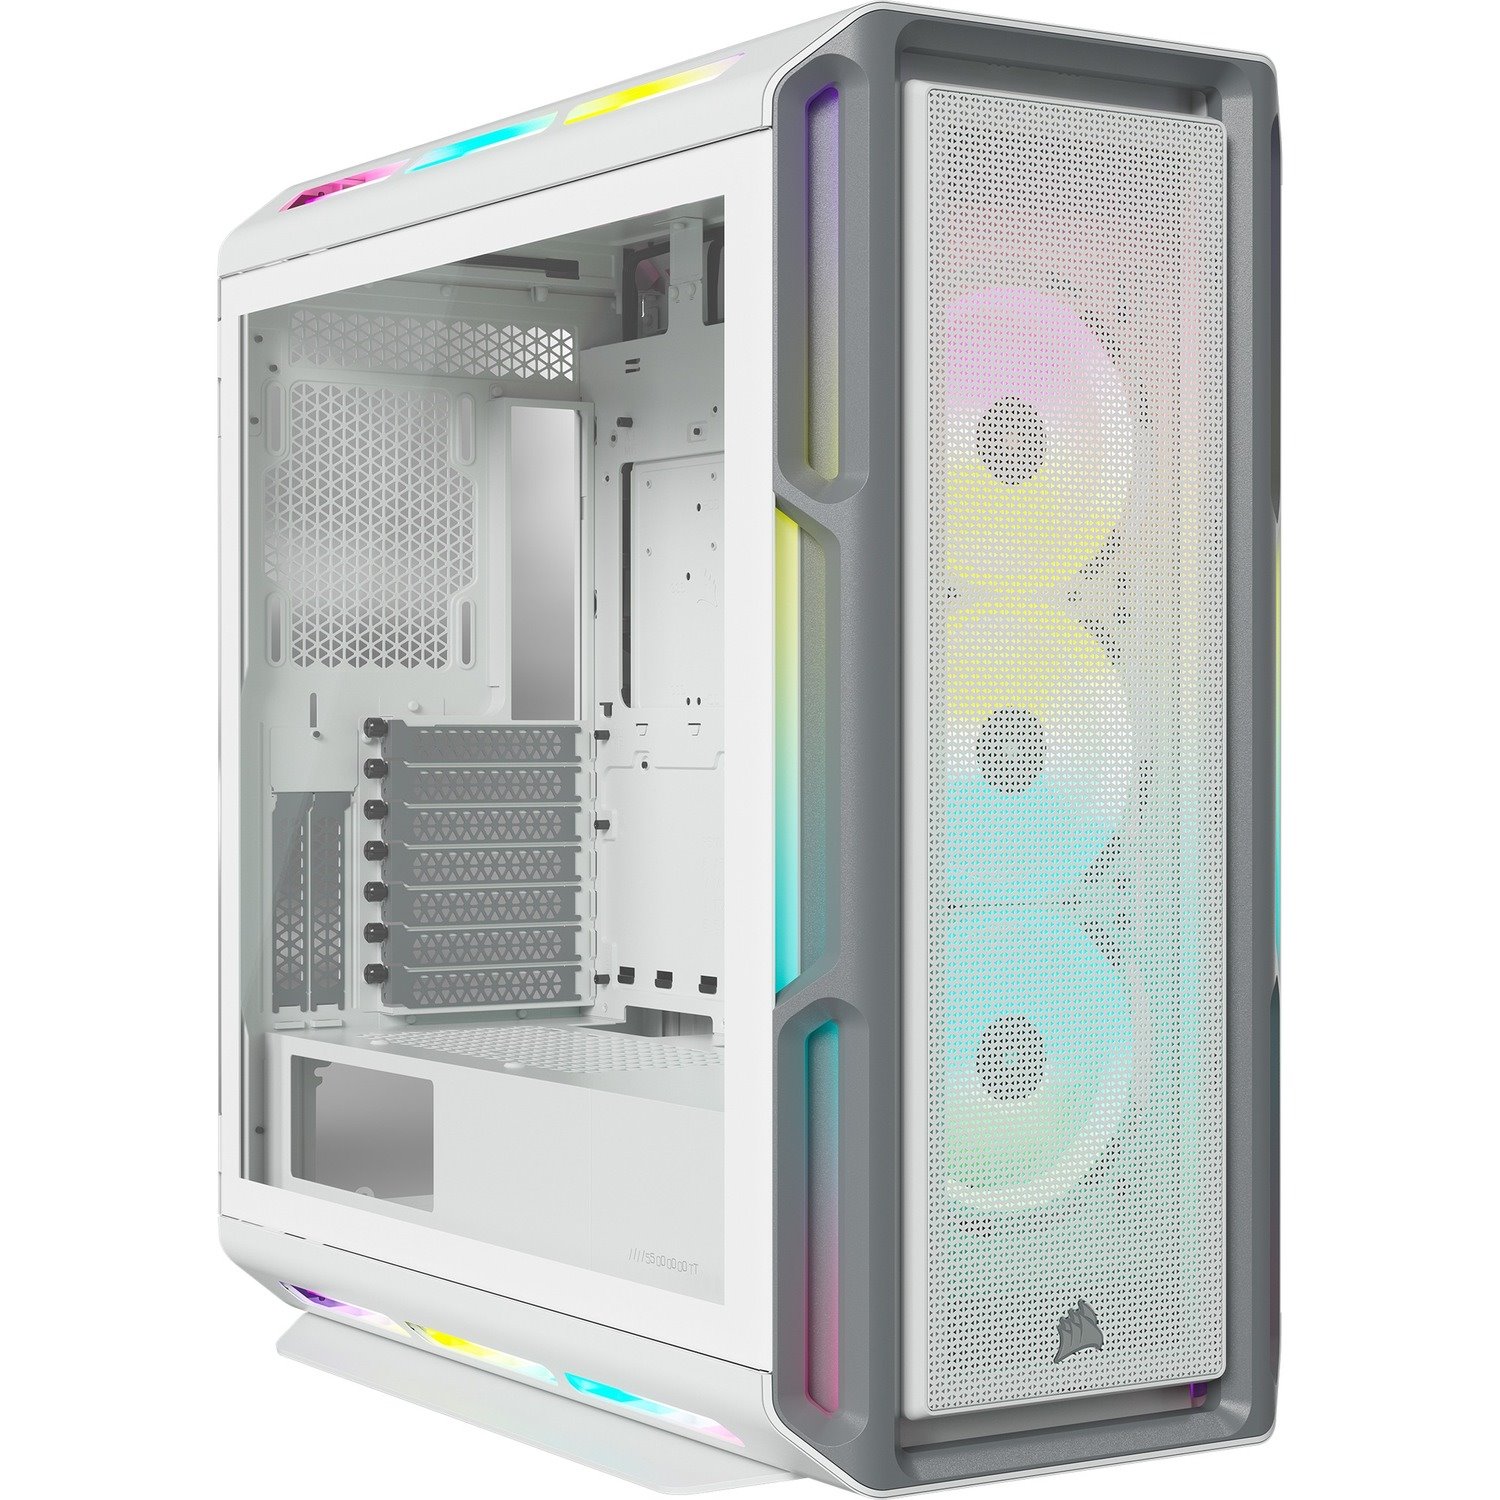 Corsair iCUE 5000T Computer Case - ATX Motherboard Supported - Mid-tower - Tempered Glass, Steel - White